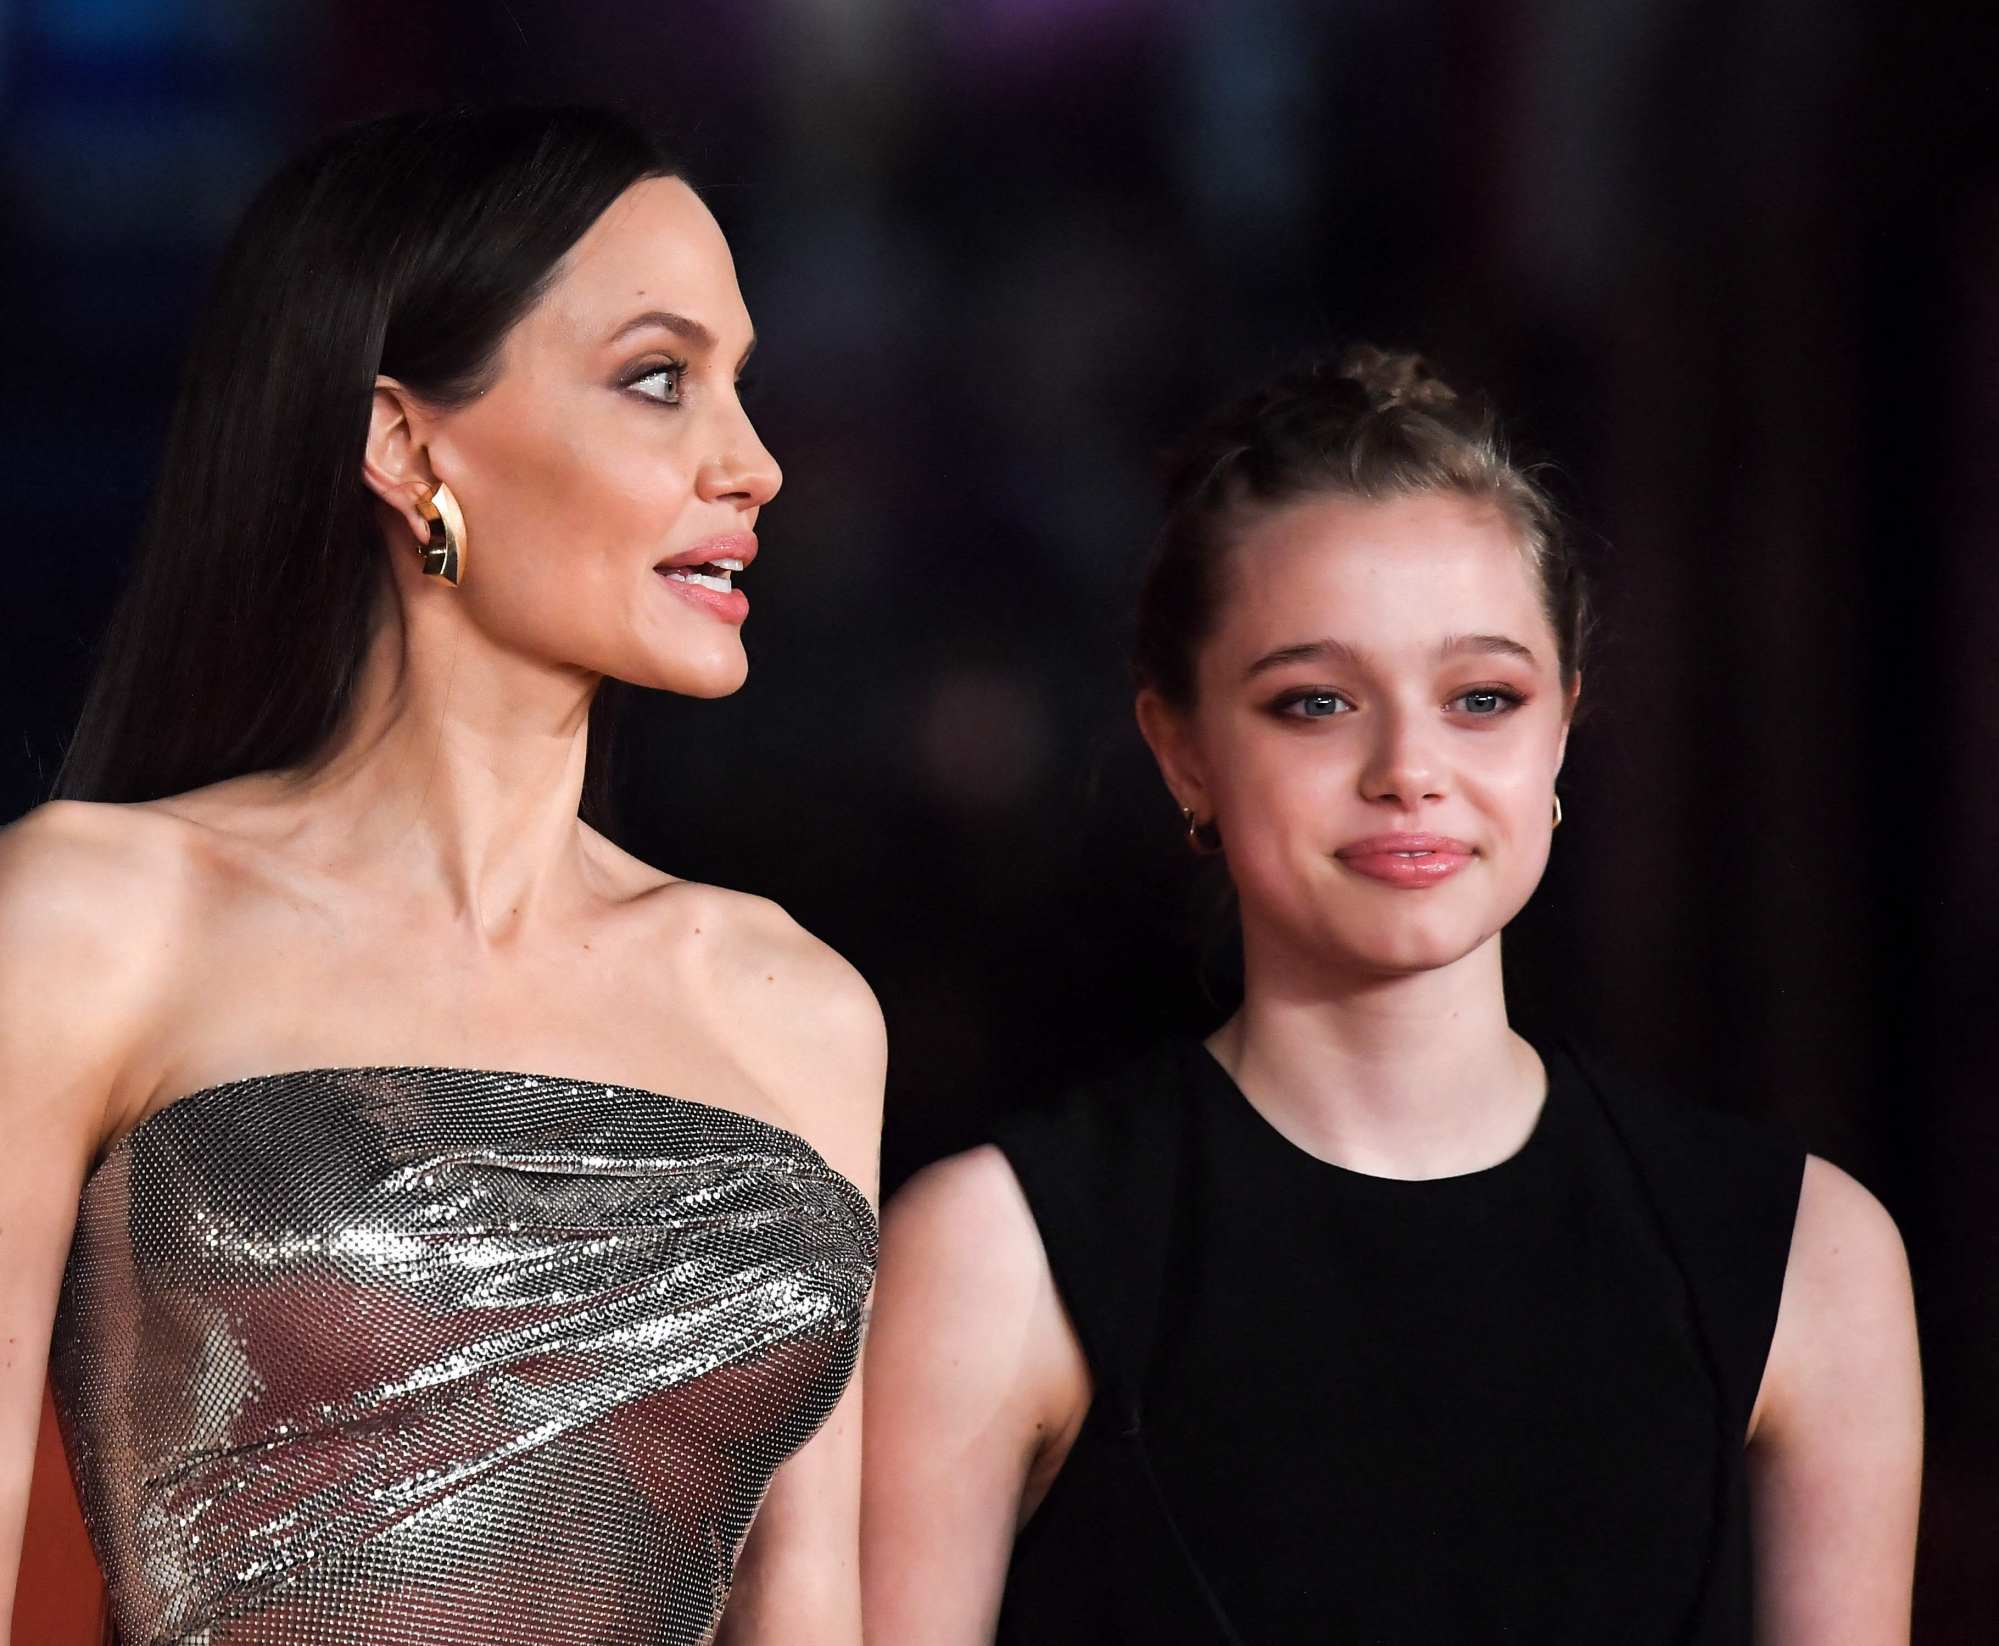 Brad Pitt 'Happy' Daughter Shiloh Is 'Coming Out of Her Shell